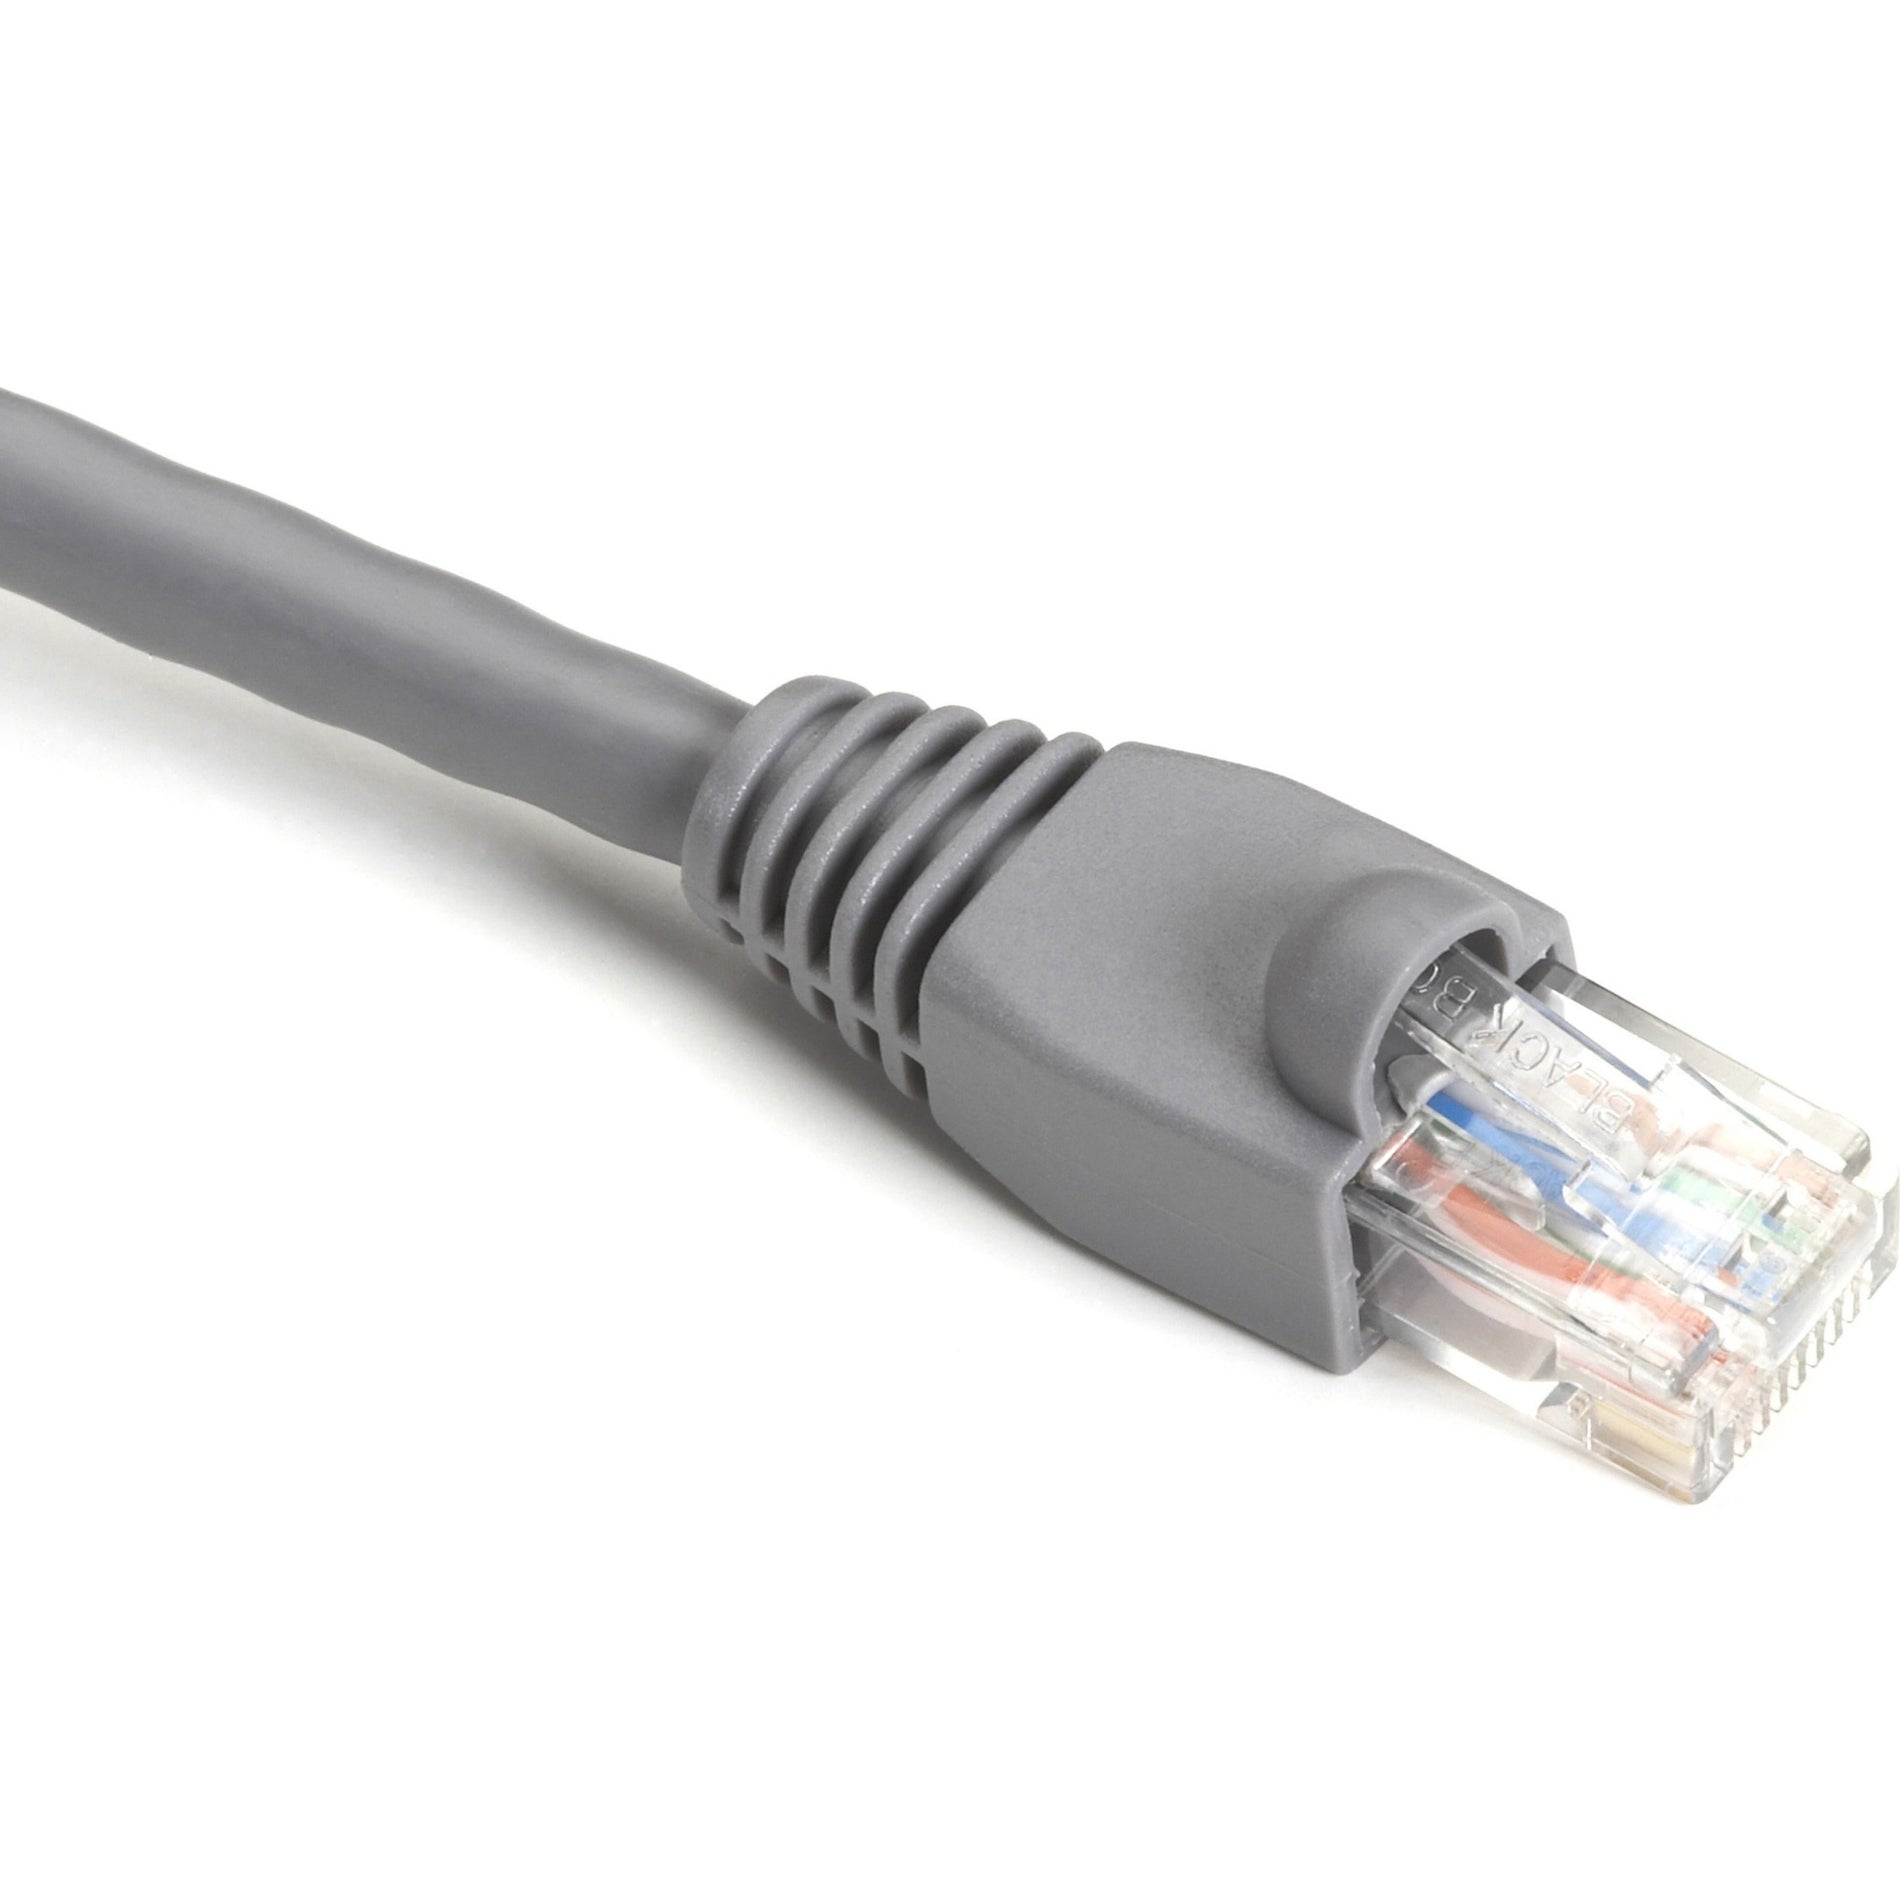 Black Box EVNSL640-06IN GigaTrue Cat.6 UTP Patch Network Cable, 1 Gbit/s Data Transfer Rate, 9" Cable Length